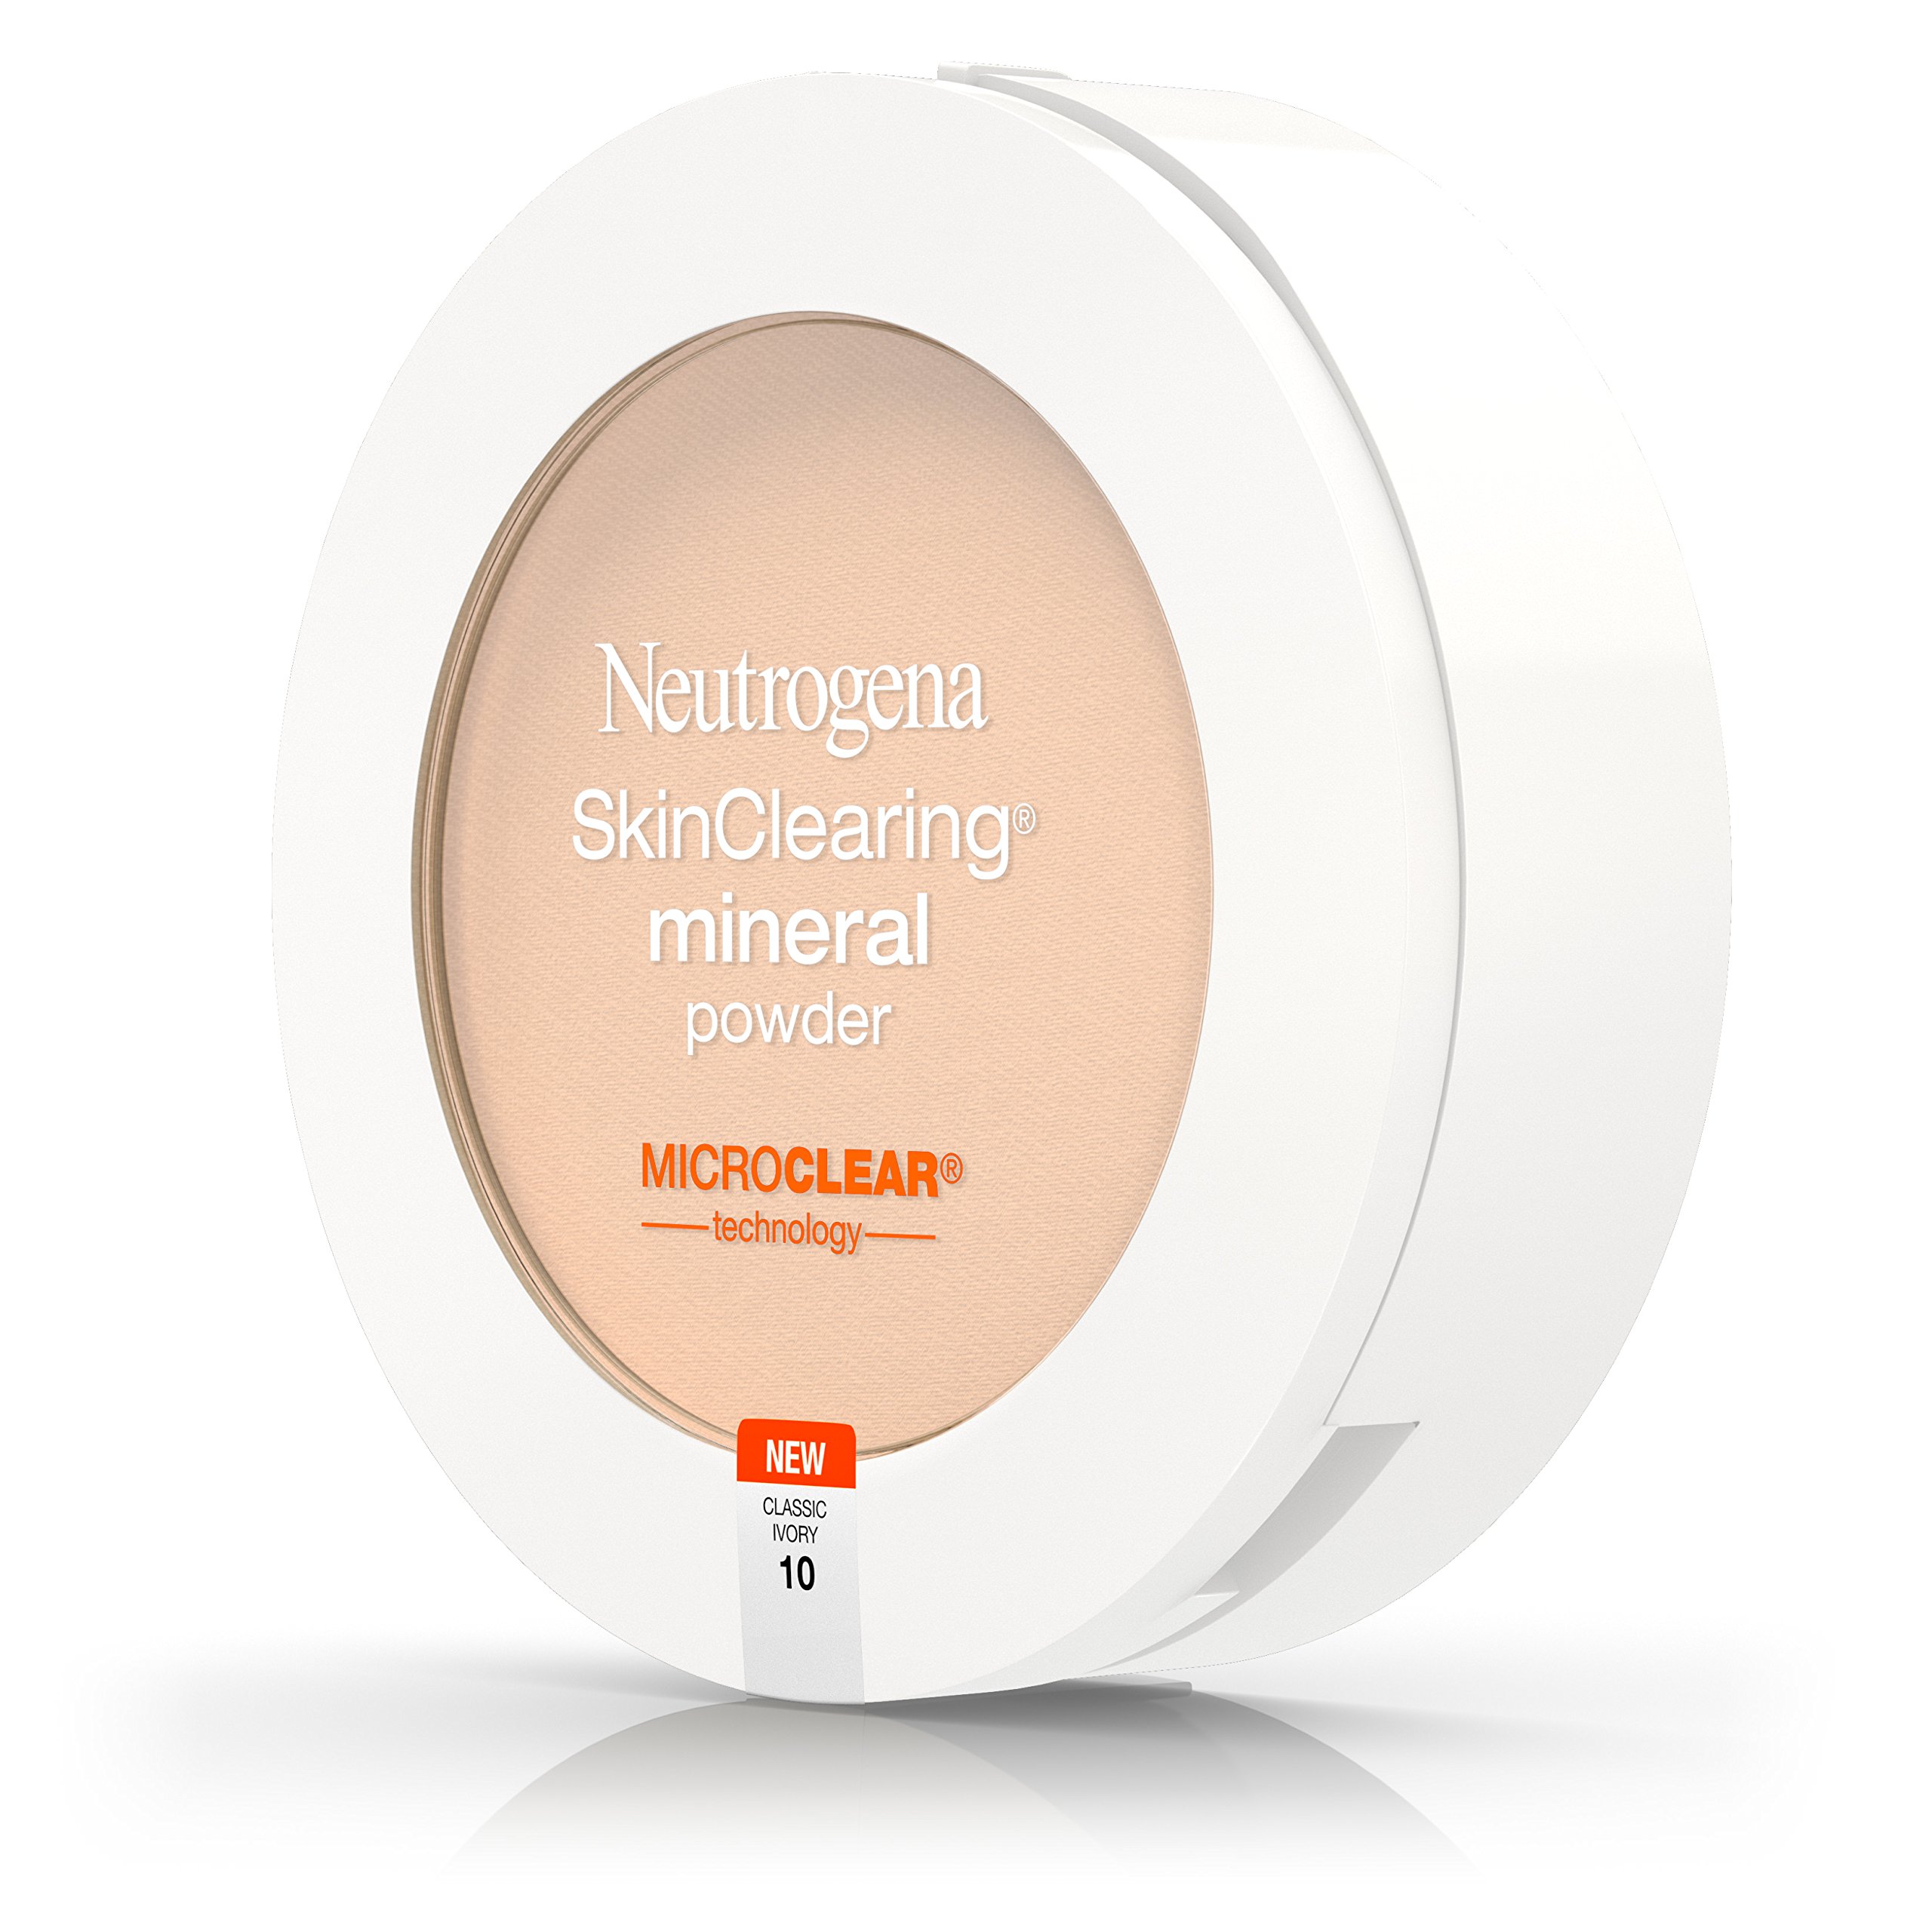 Neutrogena SkinClearing Mineral Powder, Classic Ivory 10, 0.38 Ounce (Pack of 2)